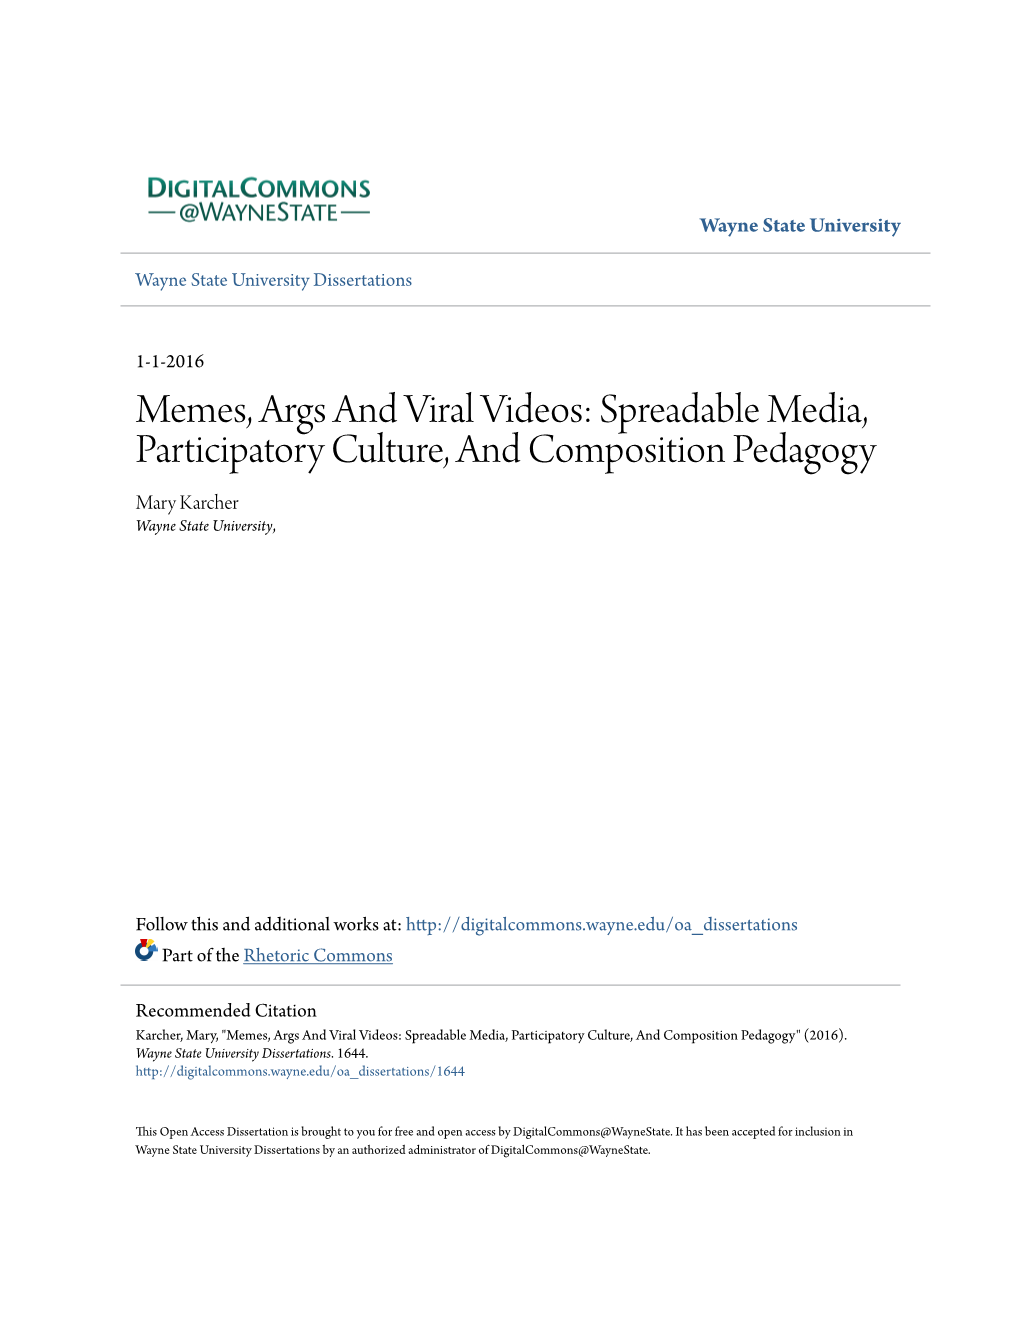 Memes, Args and Viral Videos: Spreadable Media, Participatory Culture, and Composition Pedagogy Mary Karcher Wayne State University